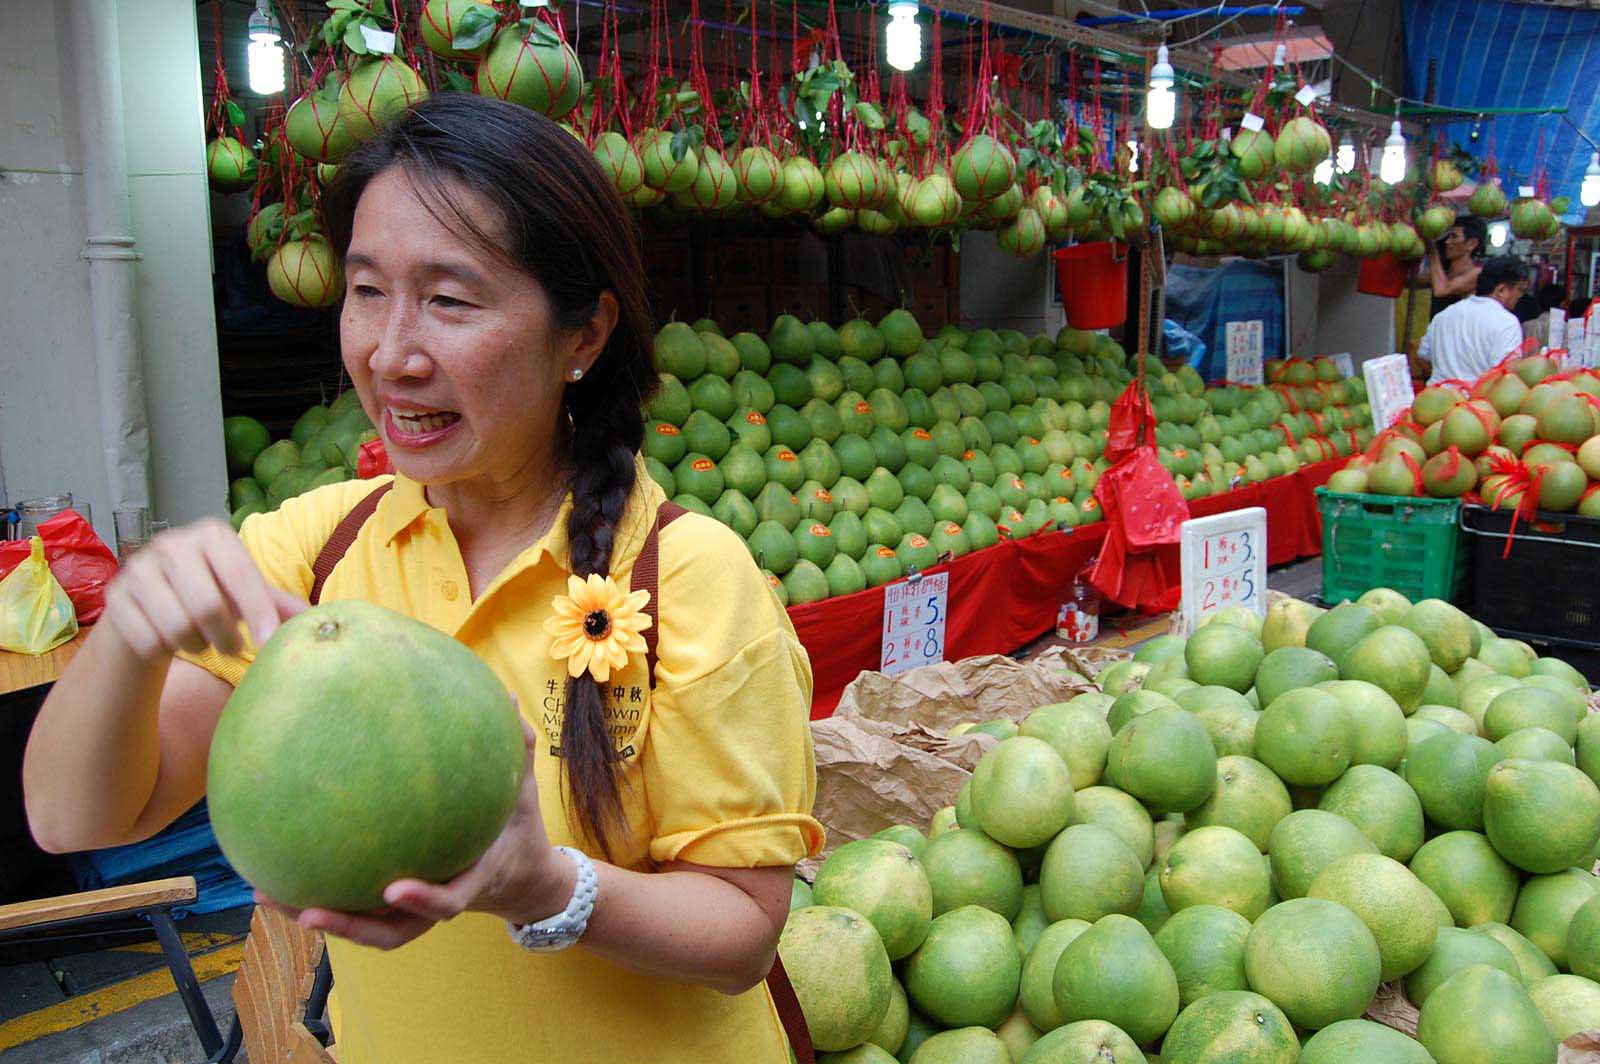 An introduction to pomelos on a walking tour of the Chinatown markets, Singapore | Top reasons to visit Singapore